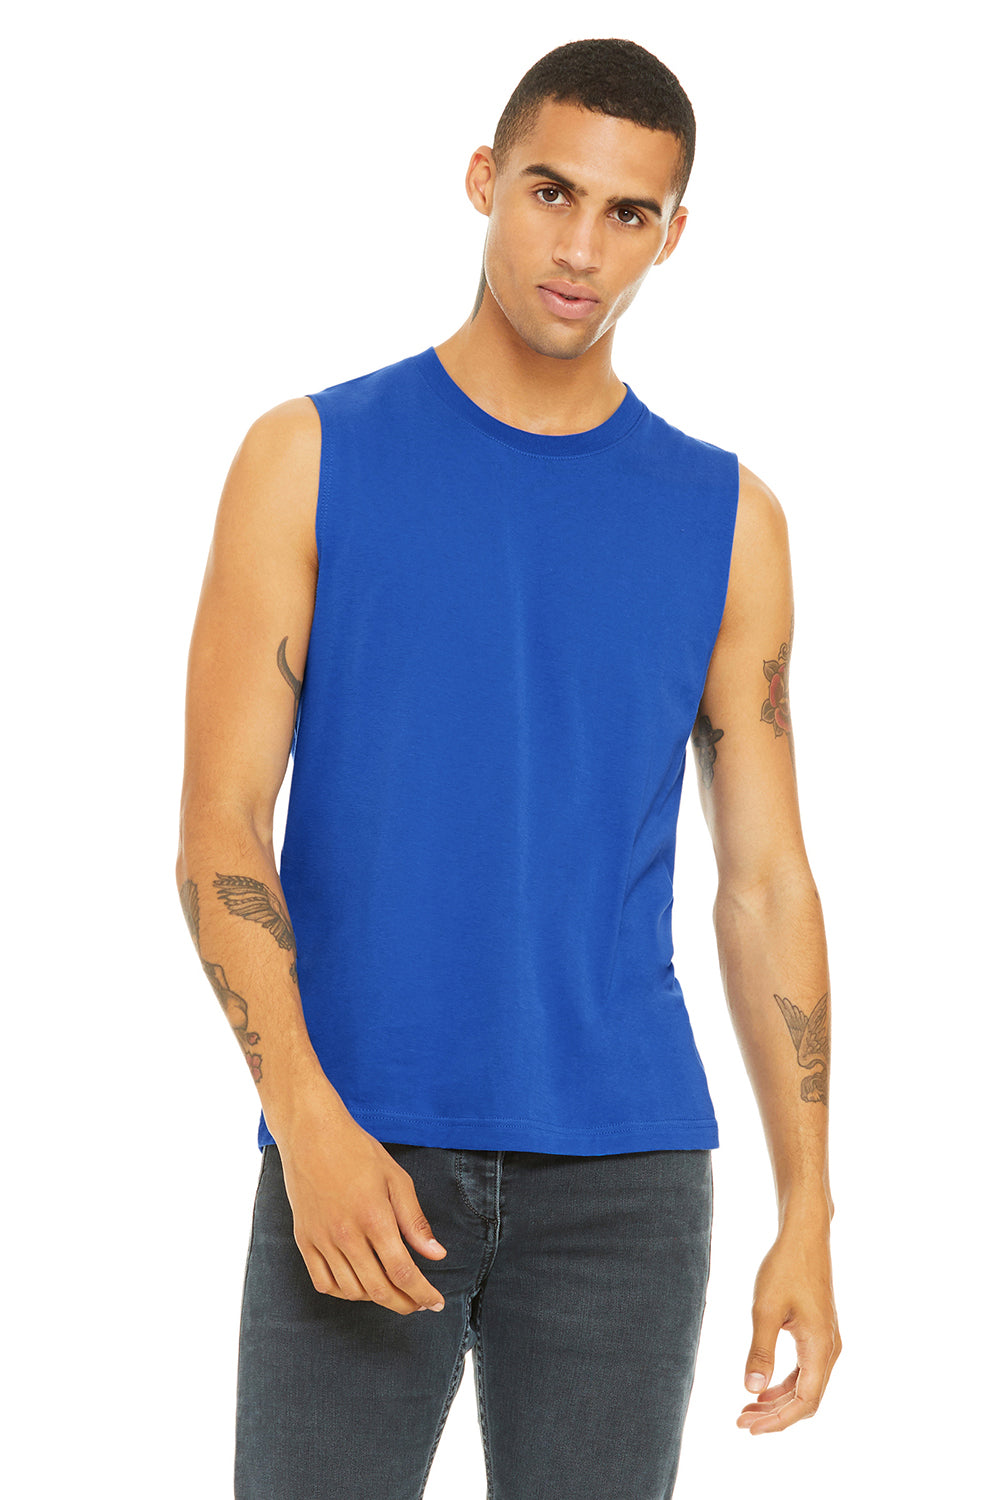 Bella + Canvas 3483 Mens Jersey Muscle Tank Top Royal Blue Front